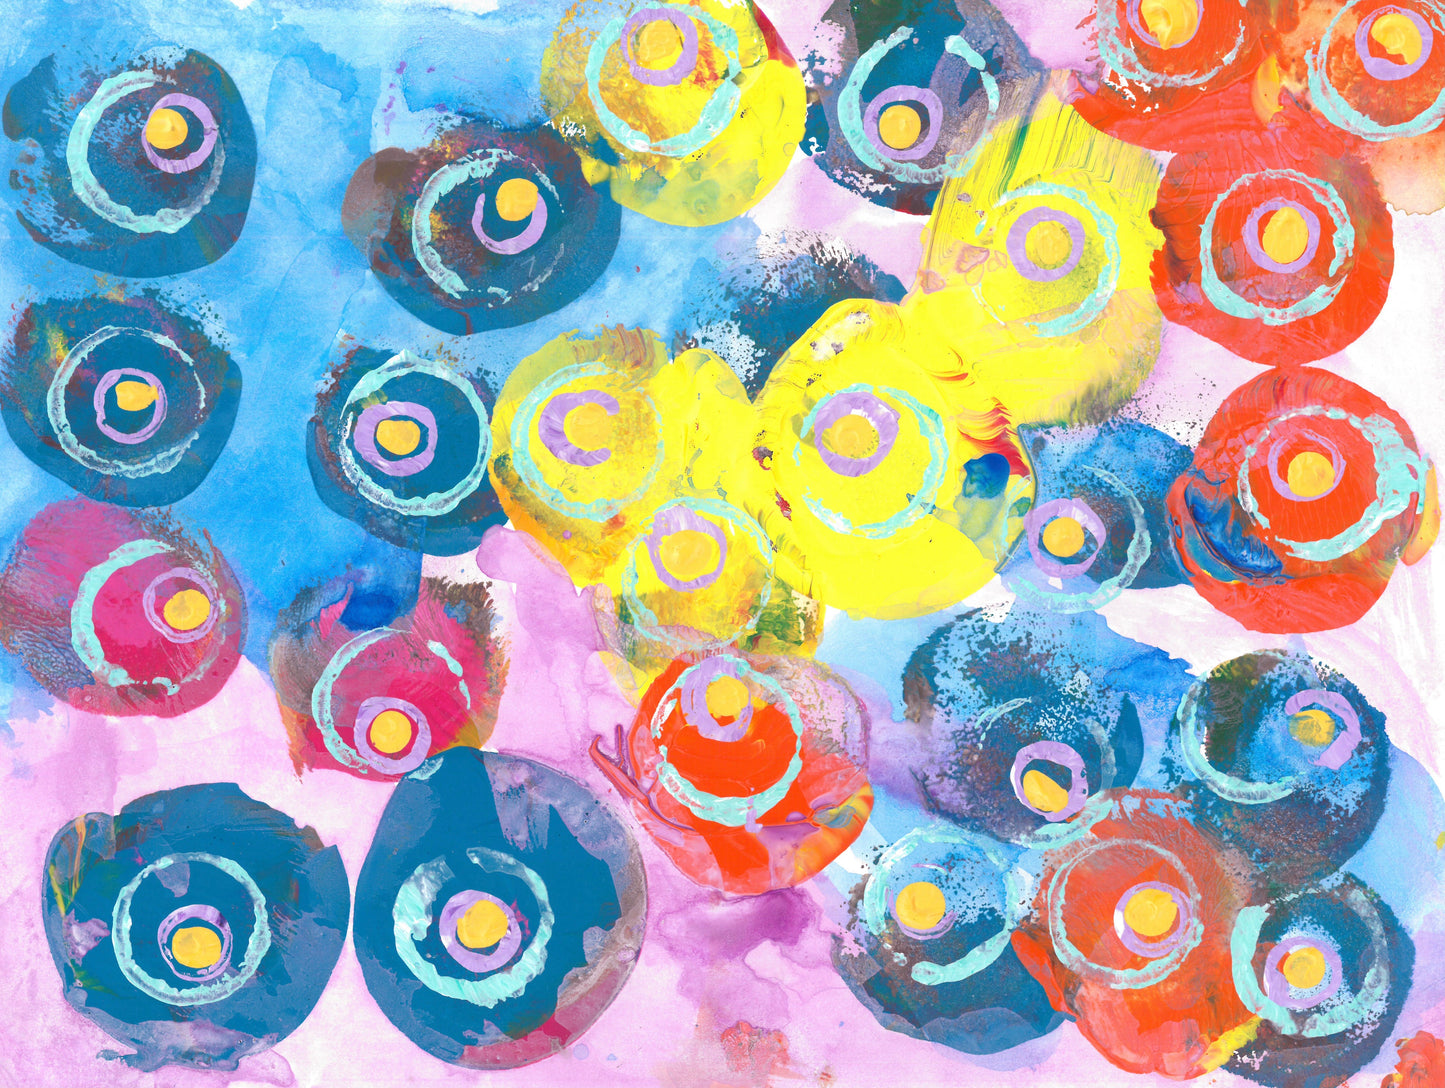 This is a multicolored abstract piece with dots and circles including: red, orange, blue, purple, yellow and pale pink.